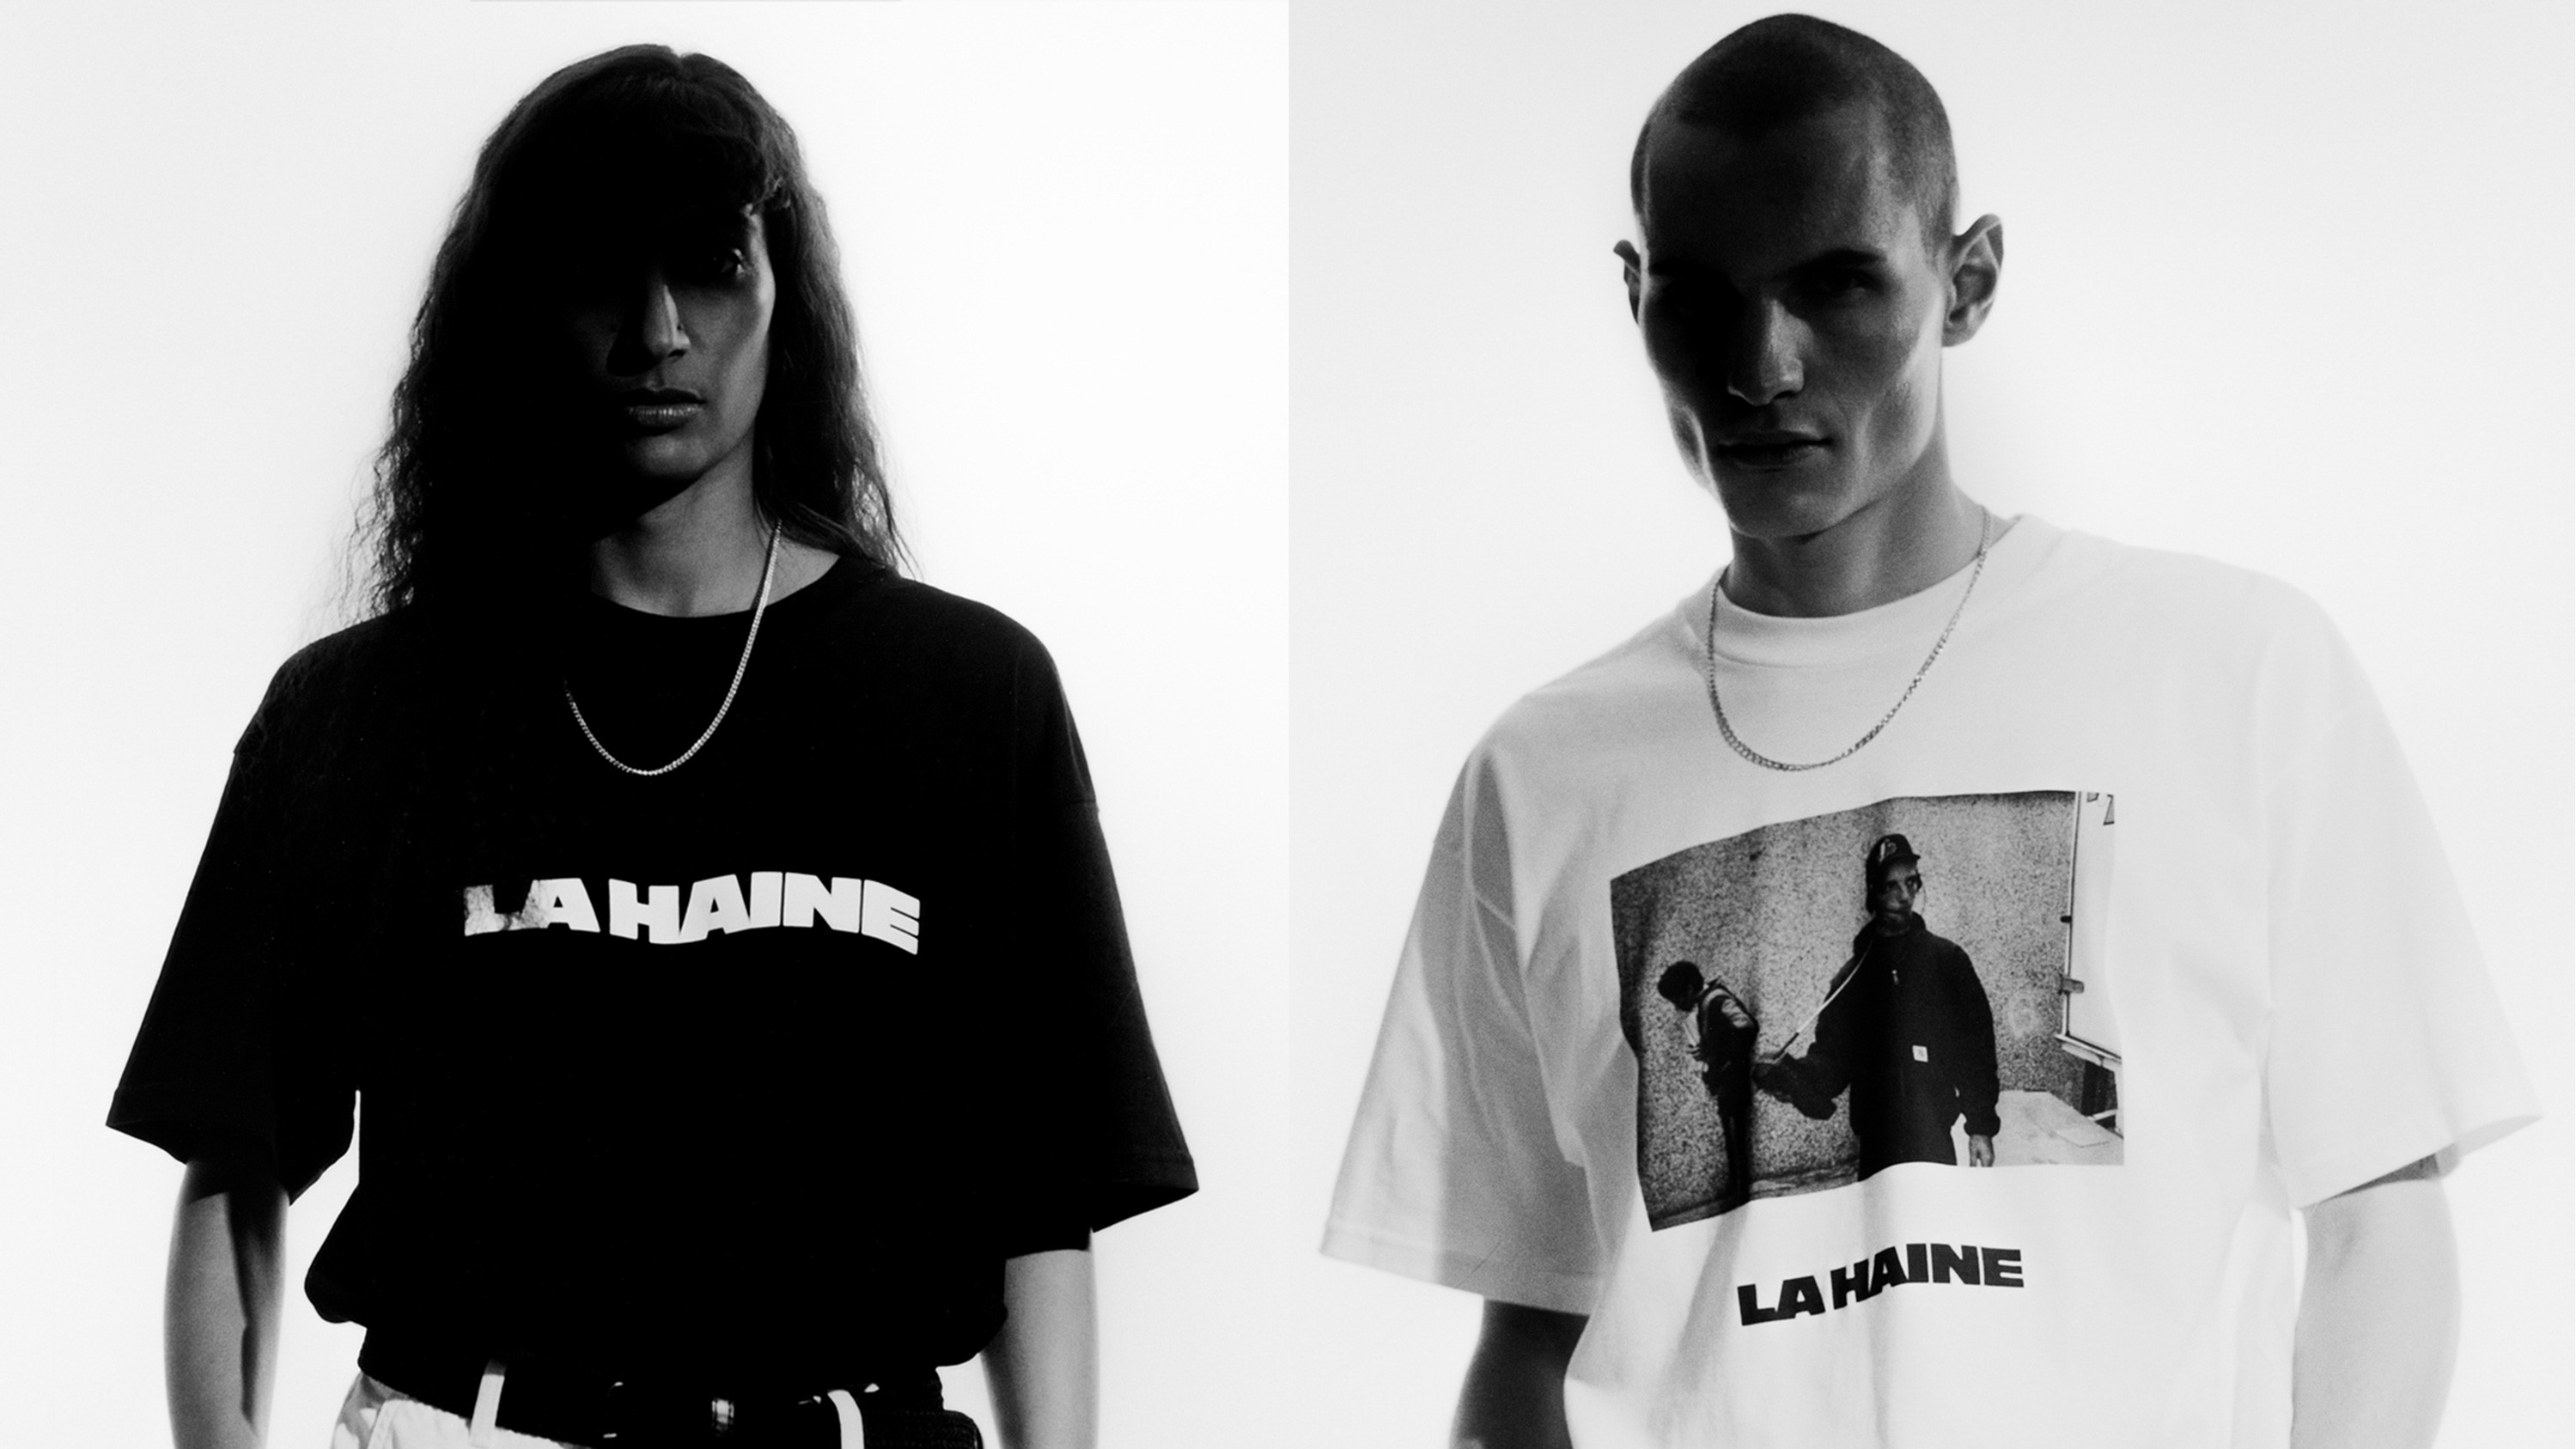 Check out Carhartt WIP's Haine-themed capsule collection